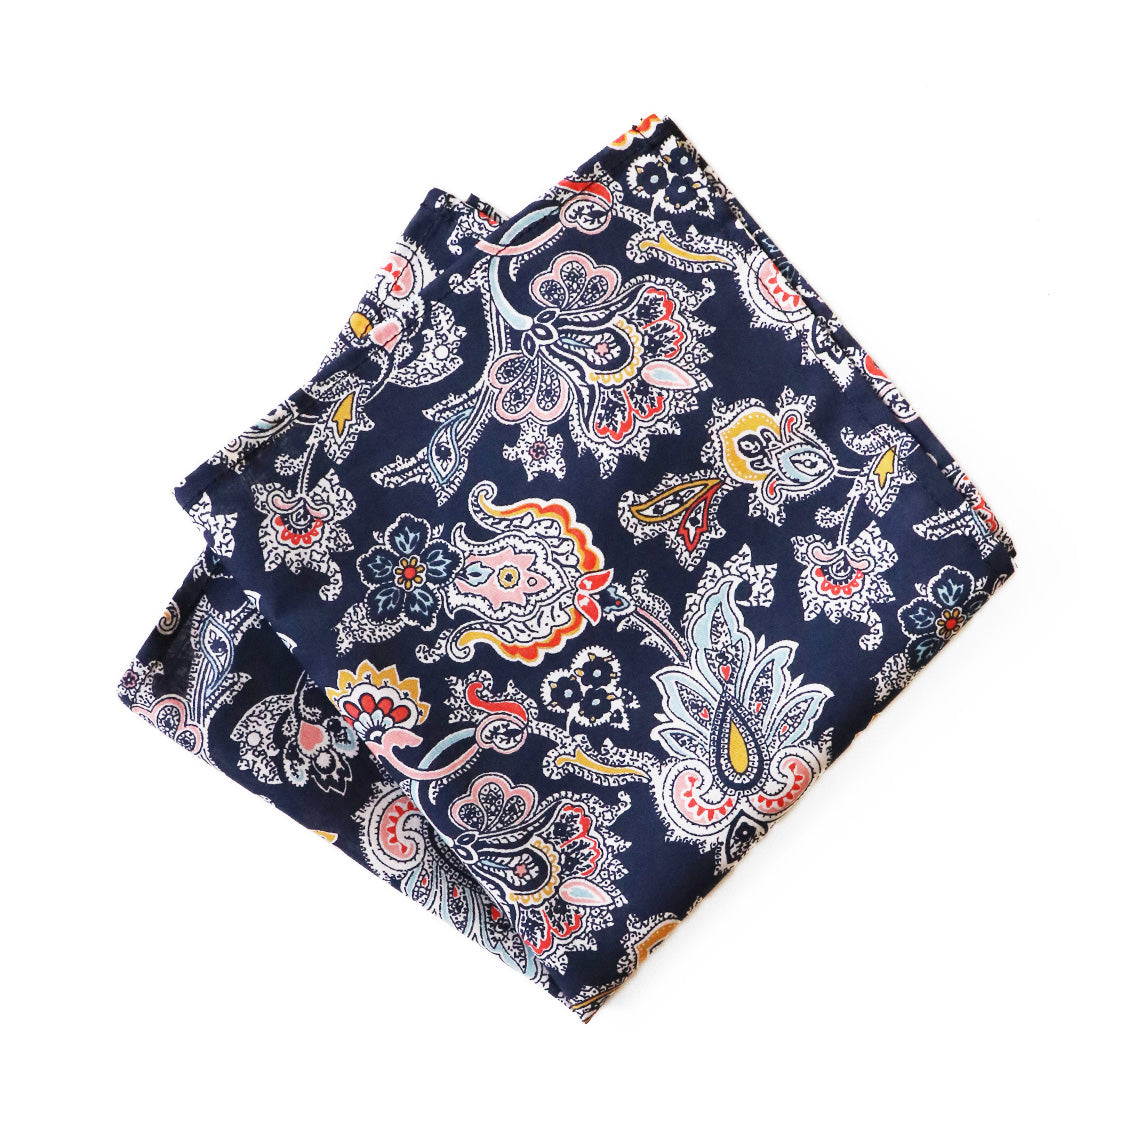 Liberty cotton pocket square made in NZ by Parisian. Match with ties, bow ties, braces and masks